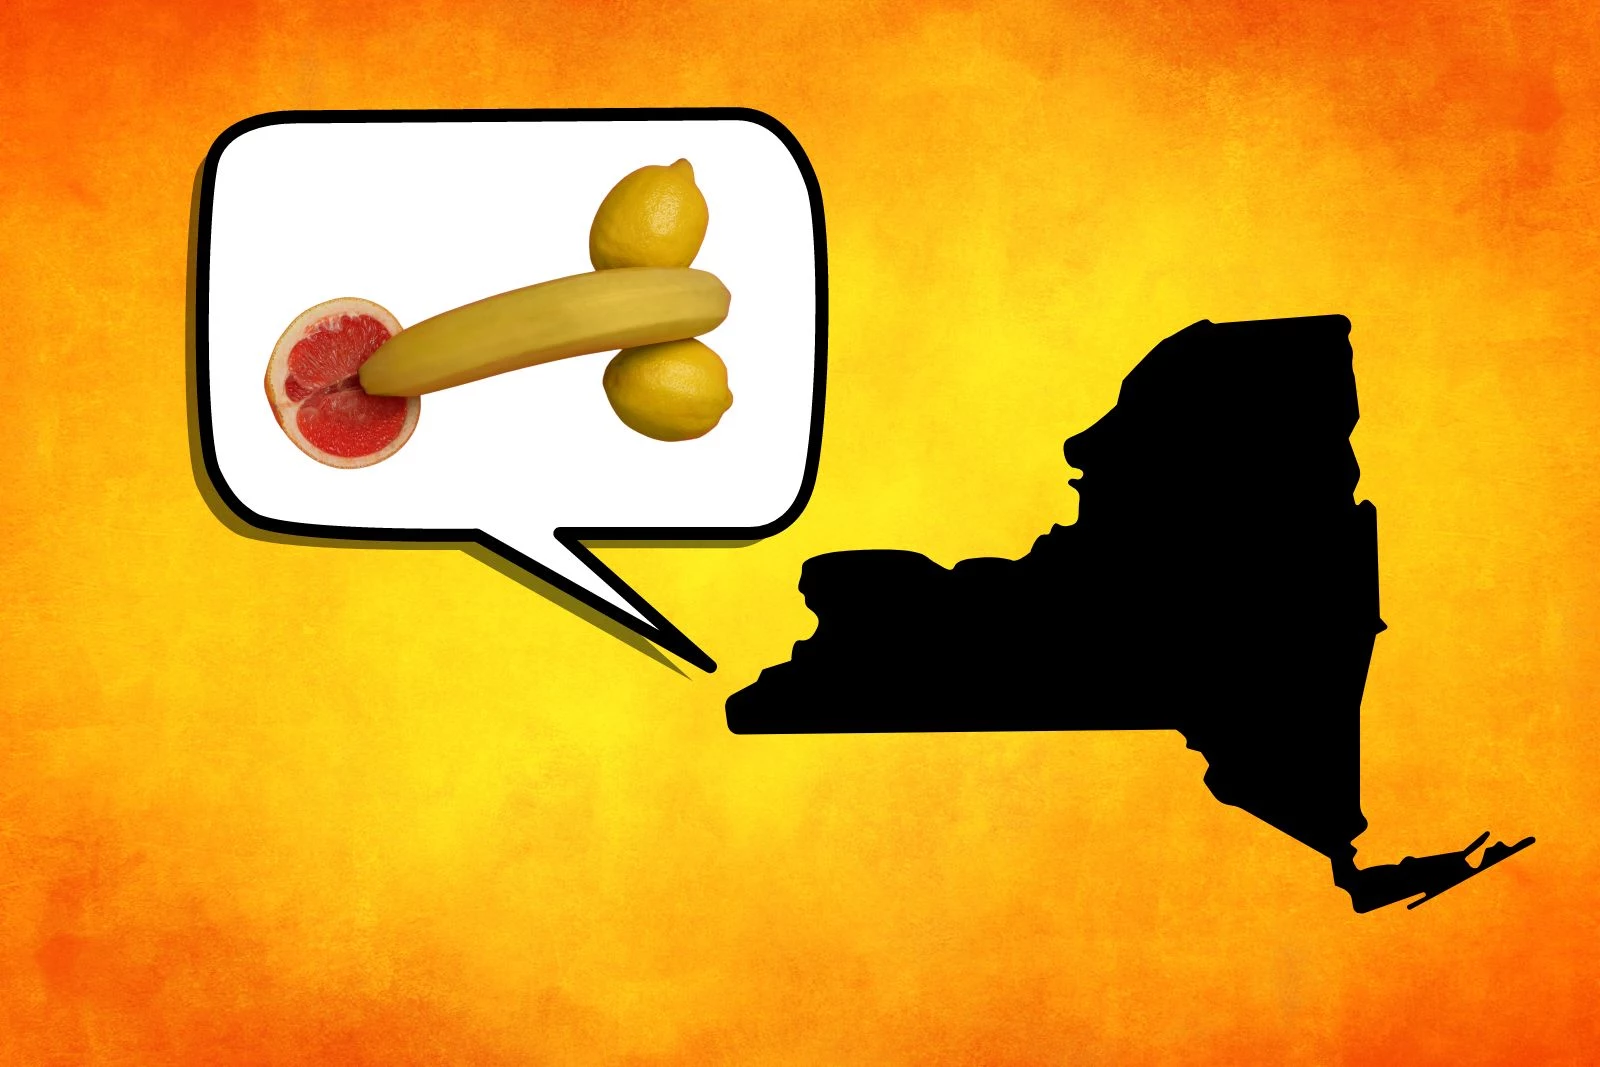 Nude Paris Hilton Blowjobs - The 8 Lewdest-Sounding Towns in New York State